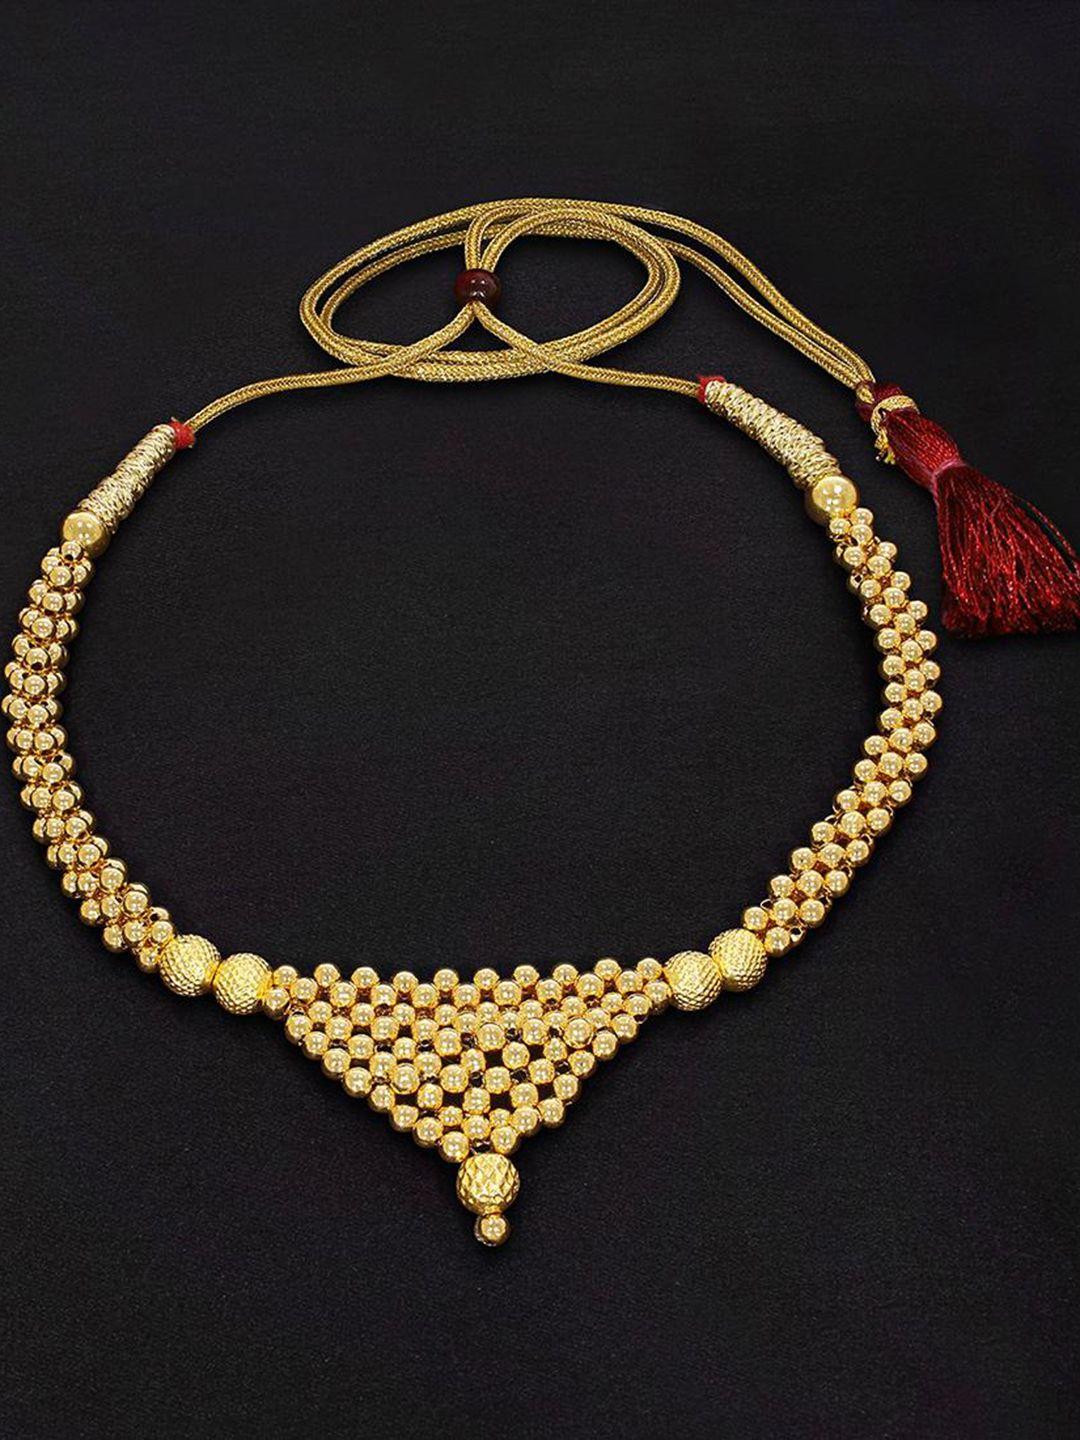 candere a kalyan jewellers company 22kt gold traditional tushi choker necklace -2.81gm